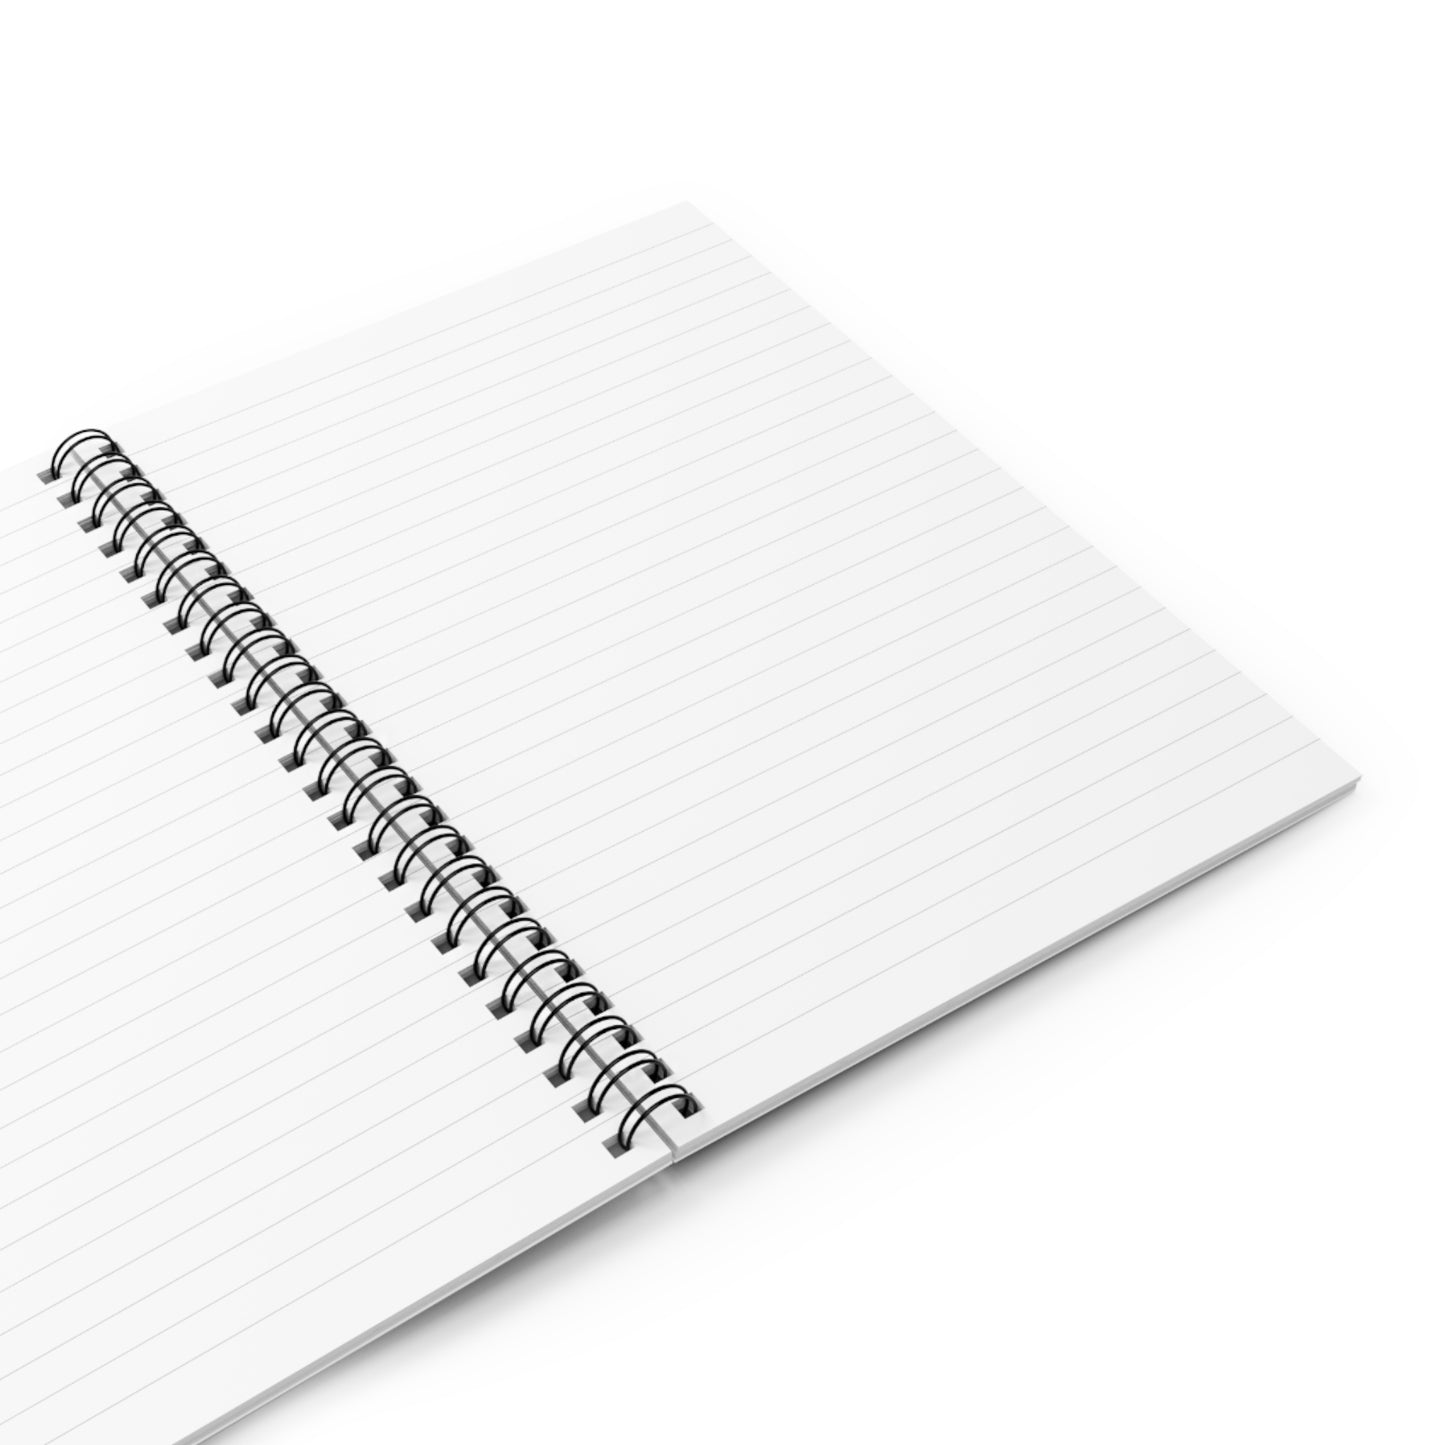 MyCo Spiral Notebook - Ruled Line